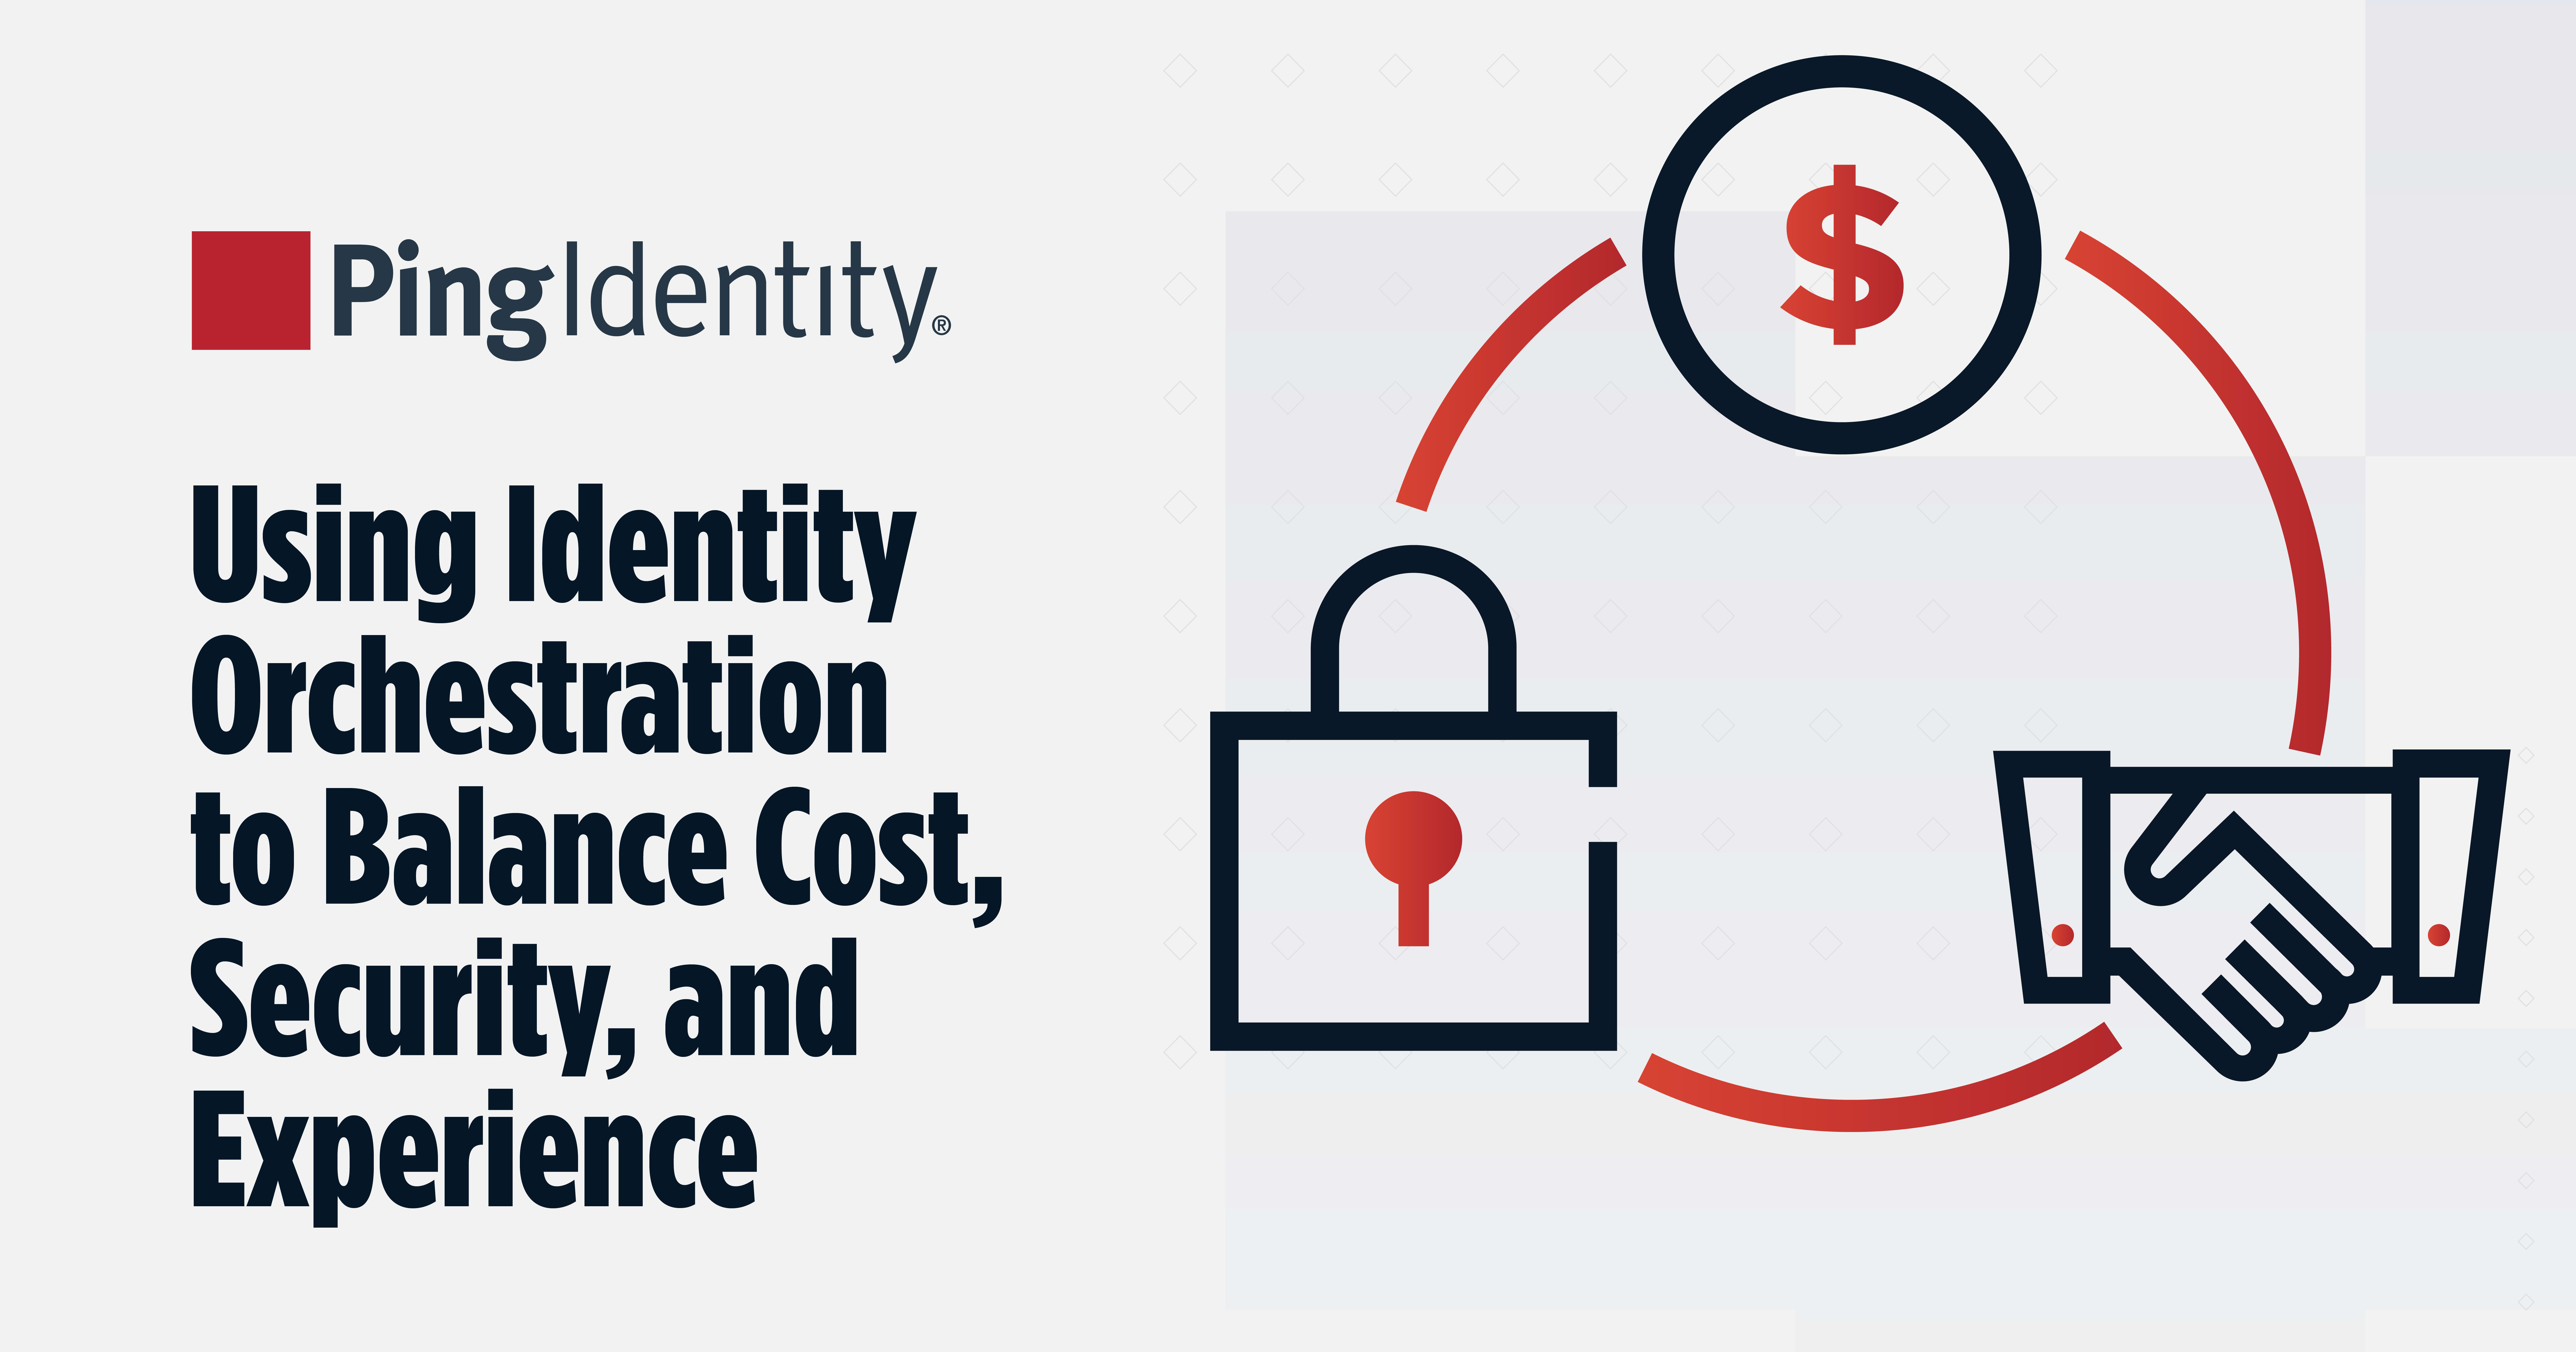 Using Identity Orchestration to Balance Cost, Security, and Experience